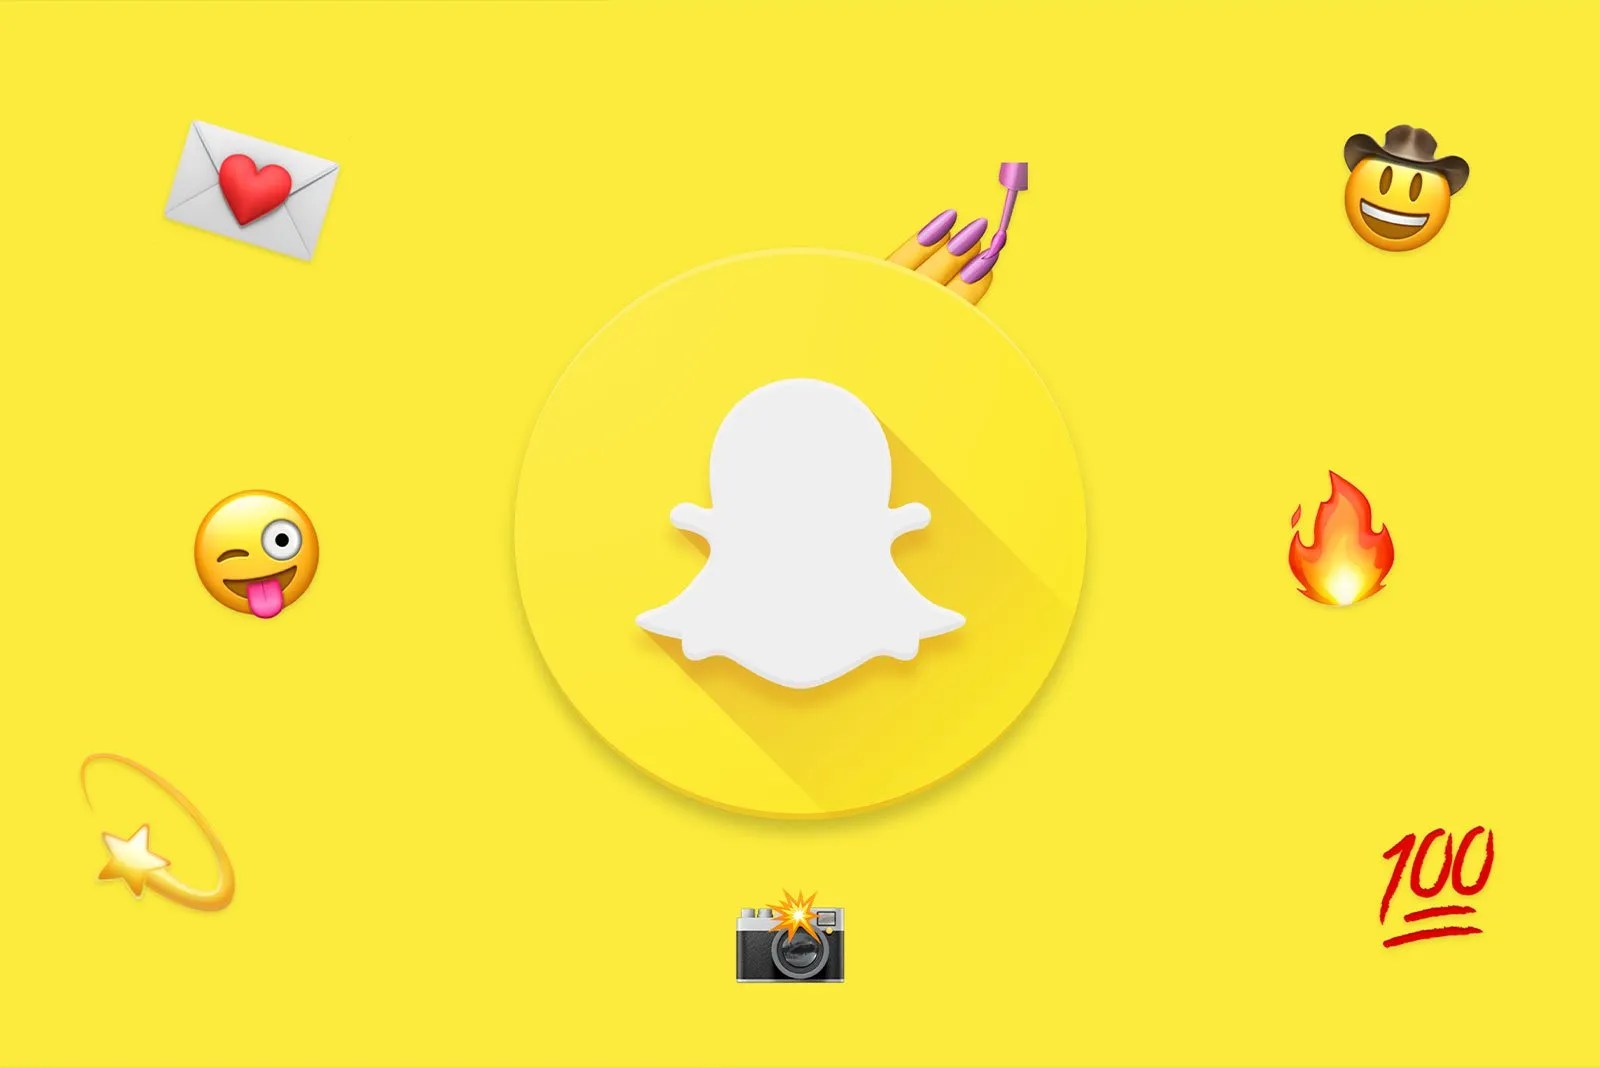 Snapchat Emoji Meanings and How to Use Them